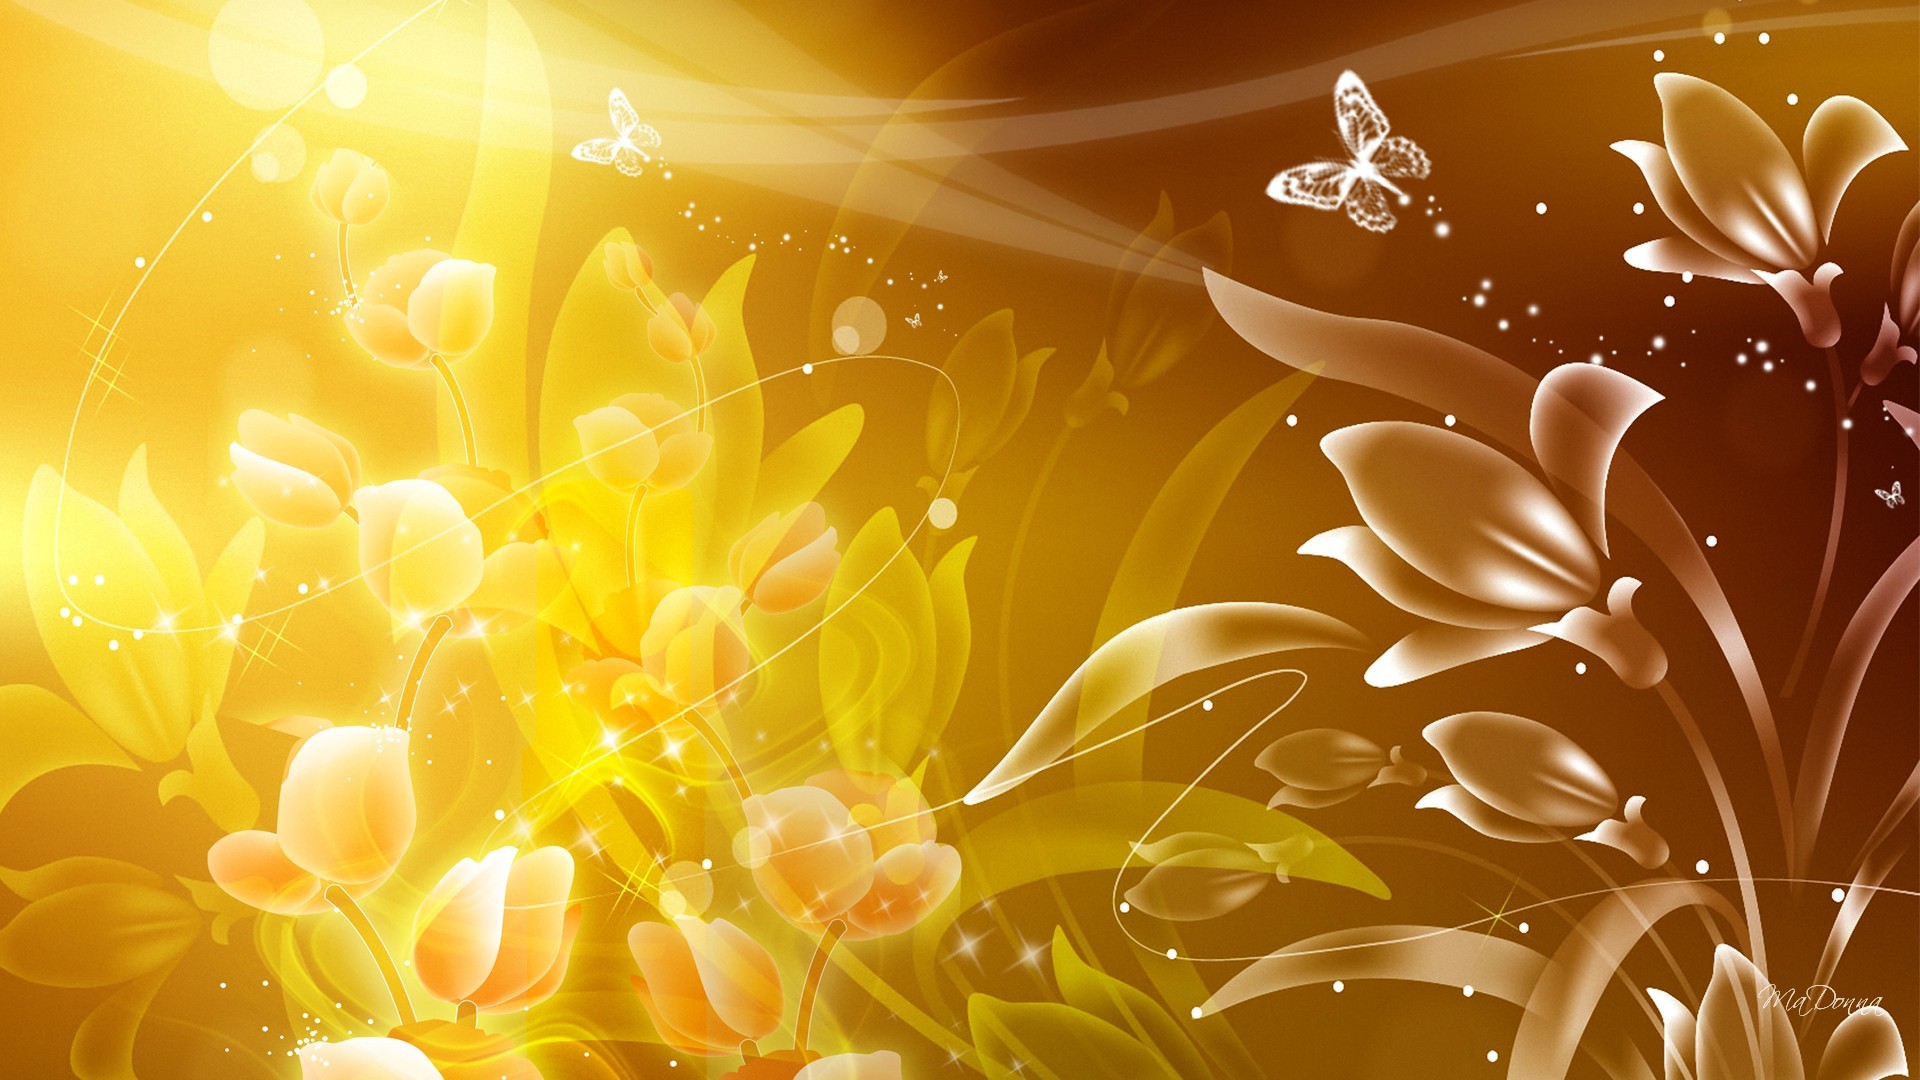 1920x1080, Gold Yellow Wallpapers - Gold Flower Background Hd - HD Wallpaper 